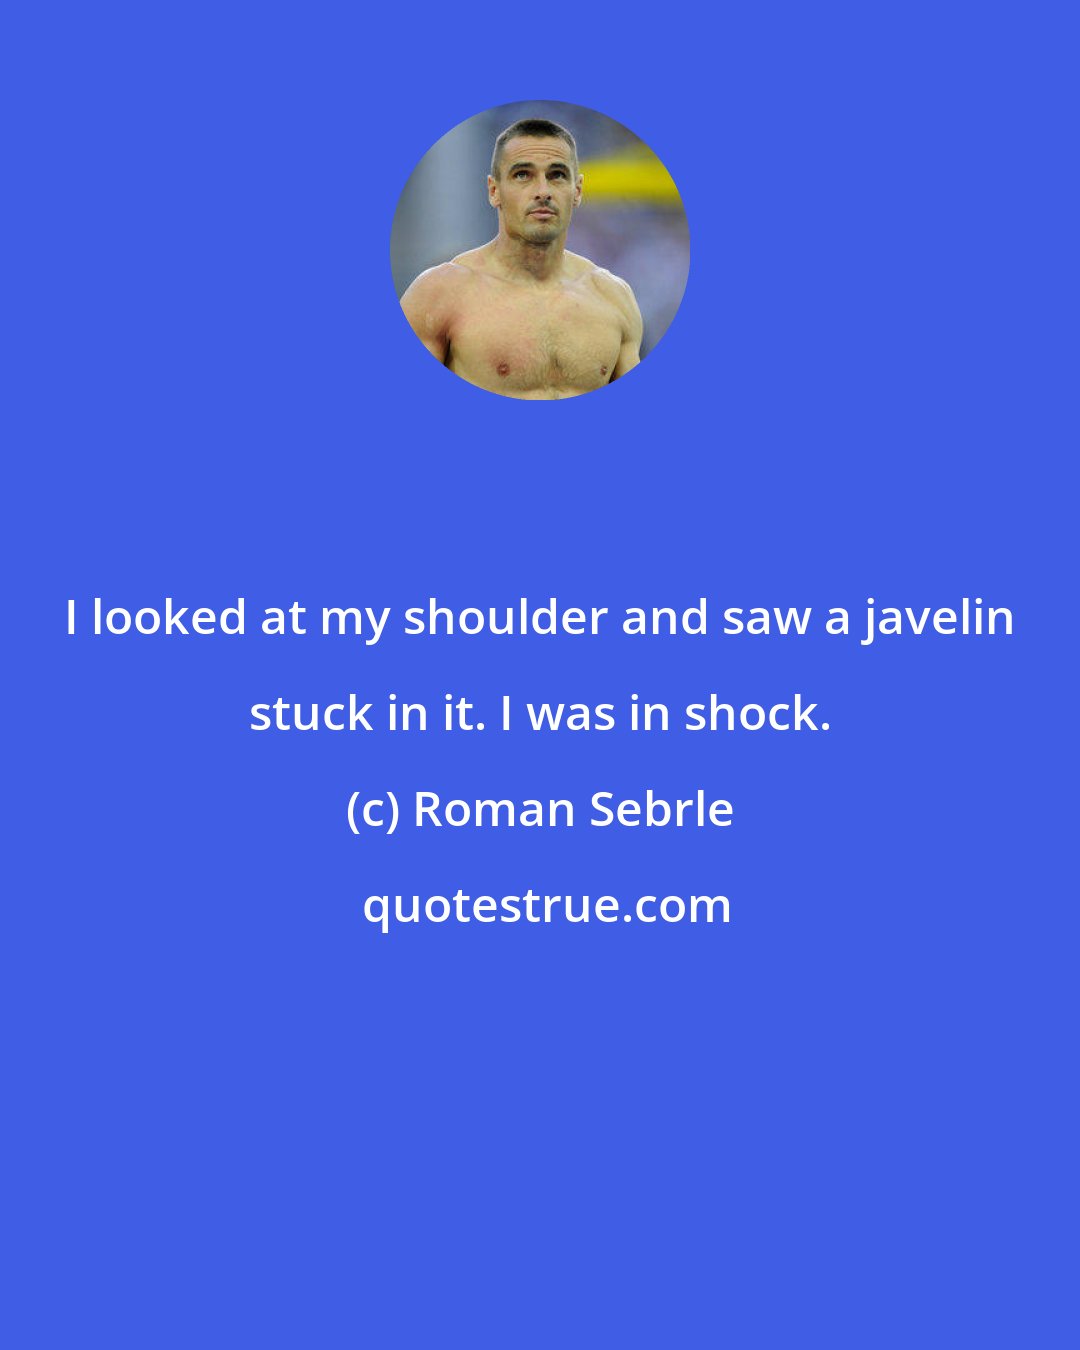 Roman Sebrle: I looked at my shoulder and saw a javelin stuck in it. I was in shock.